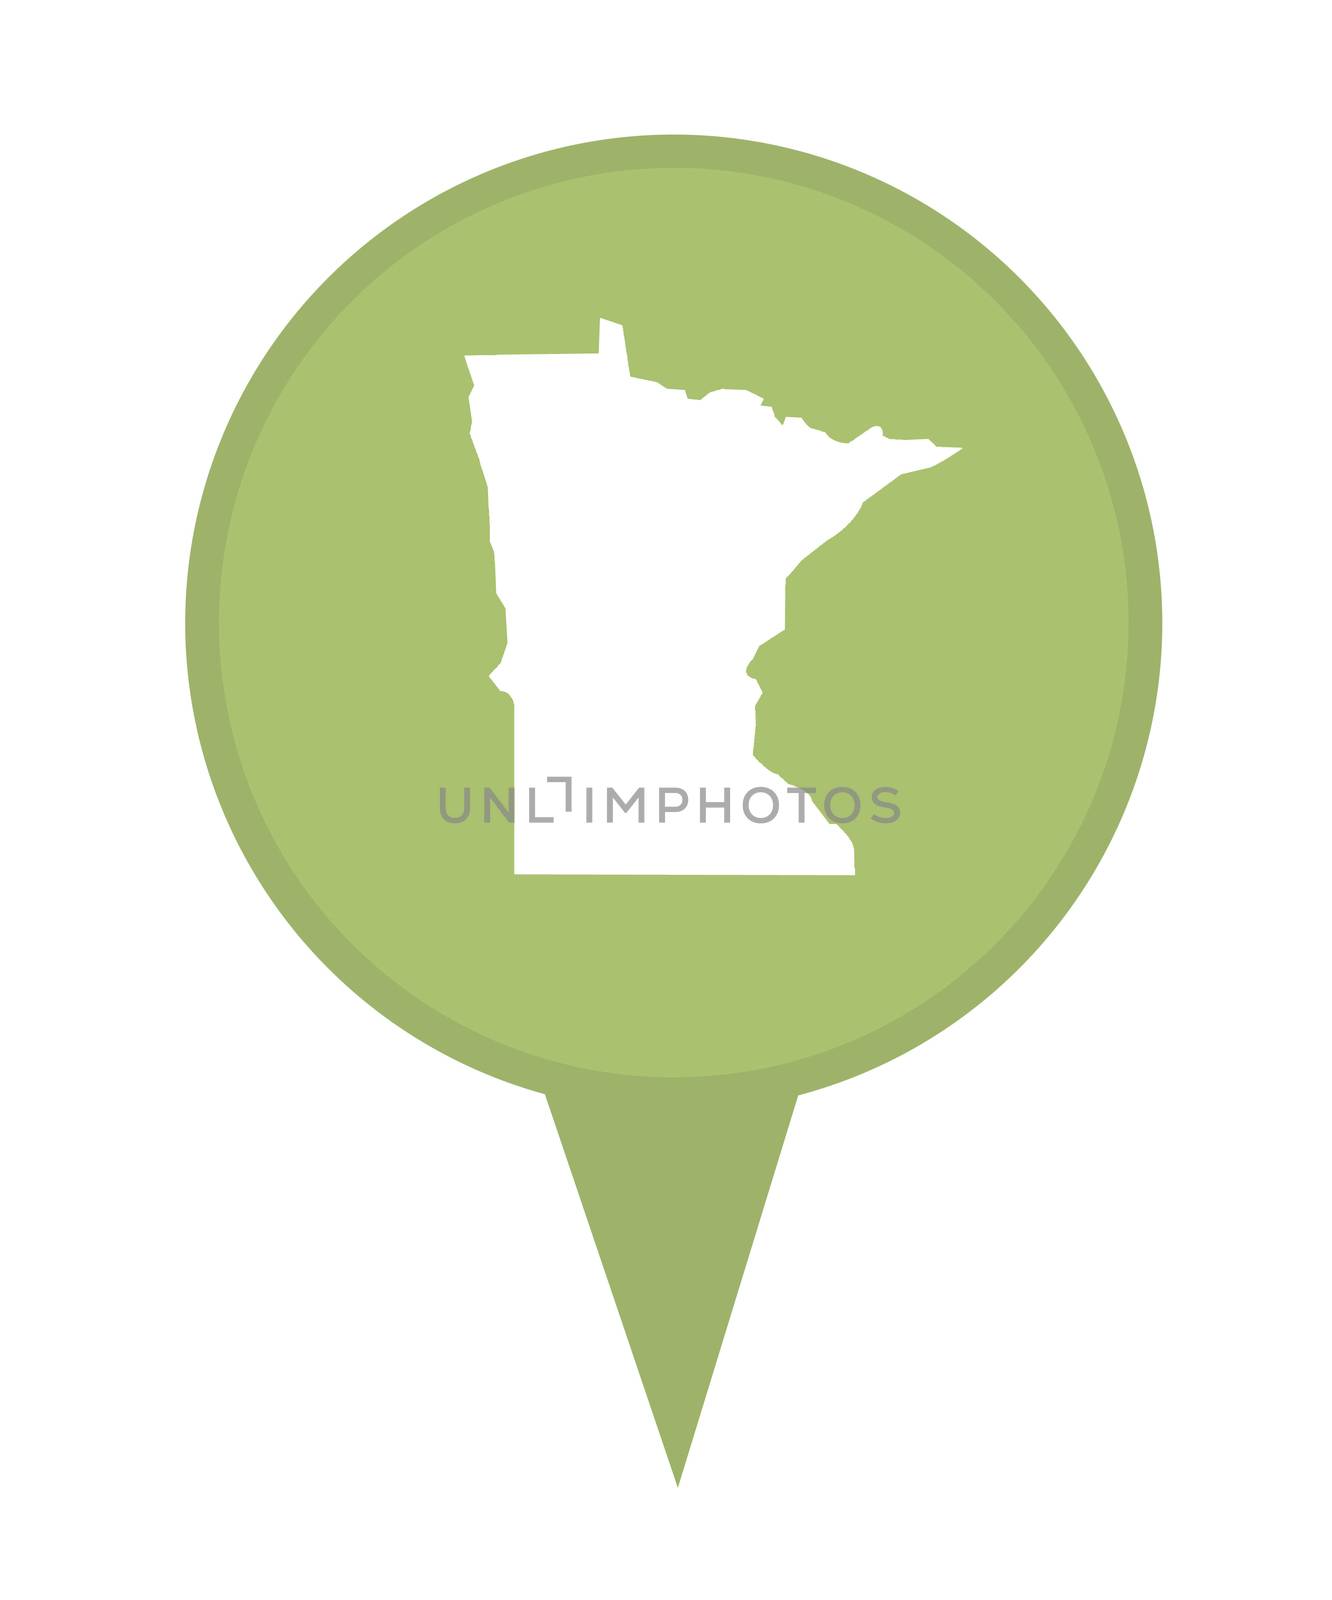 American state of Minnesota marker pin isolated on a white background.